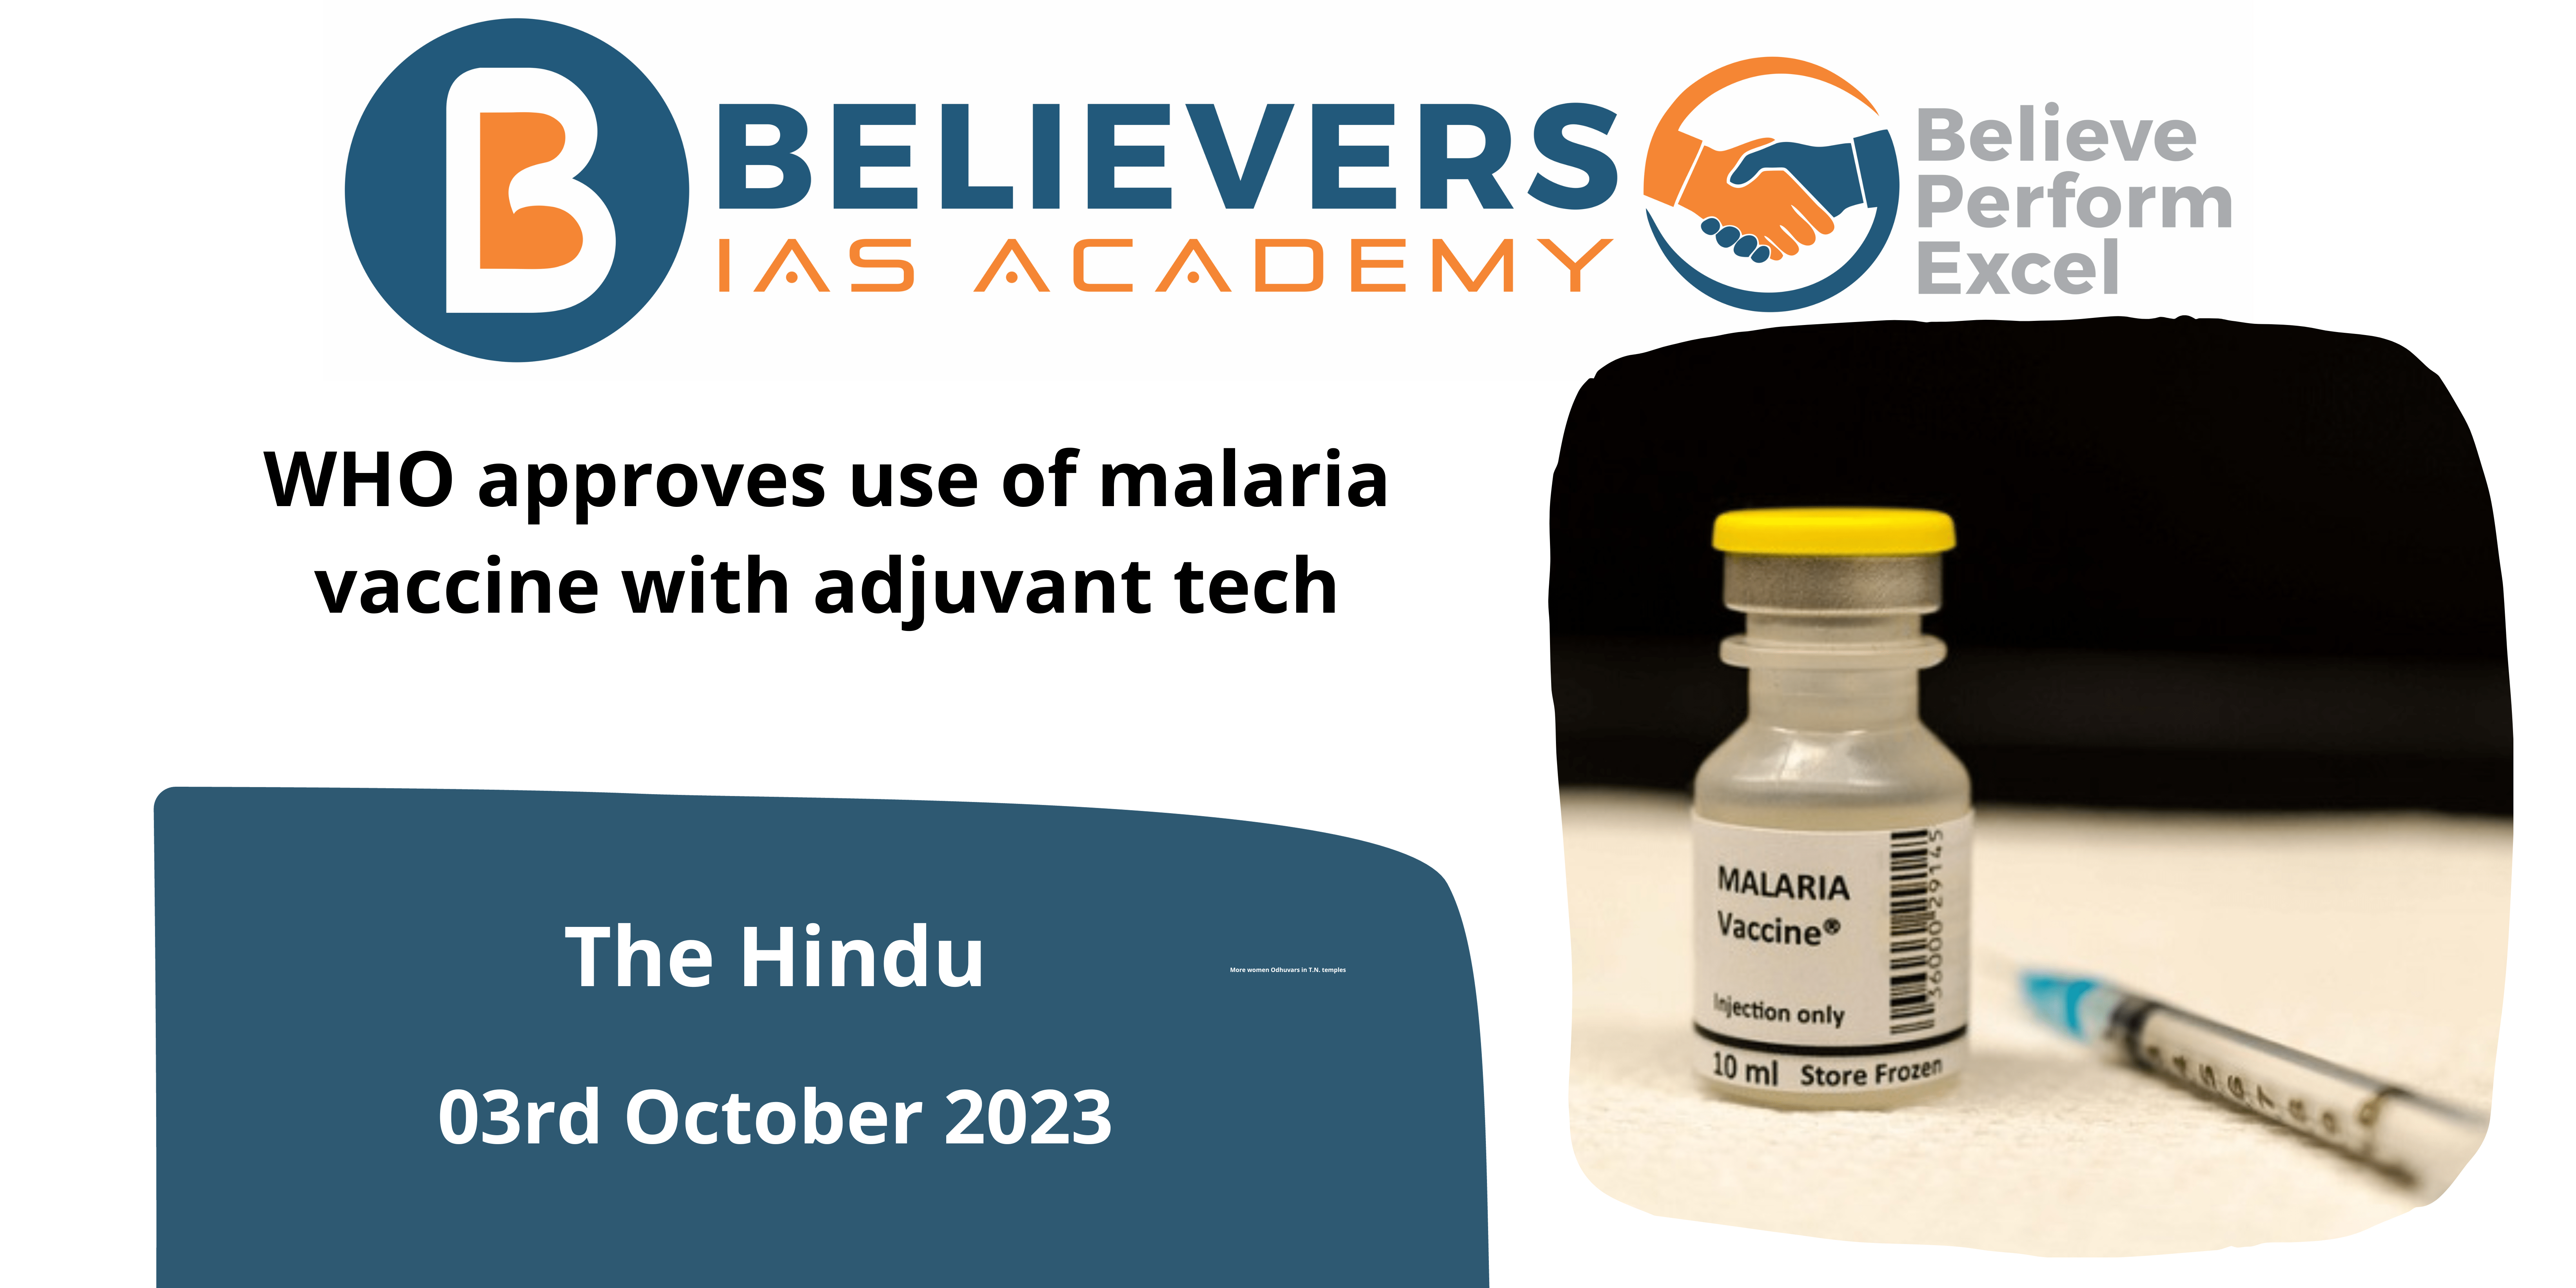 WHO approves use of malaria vaccine with adjuvant tech